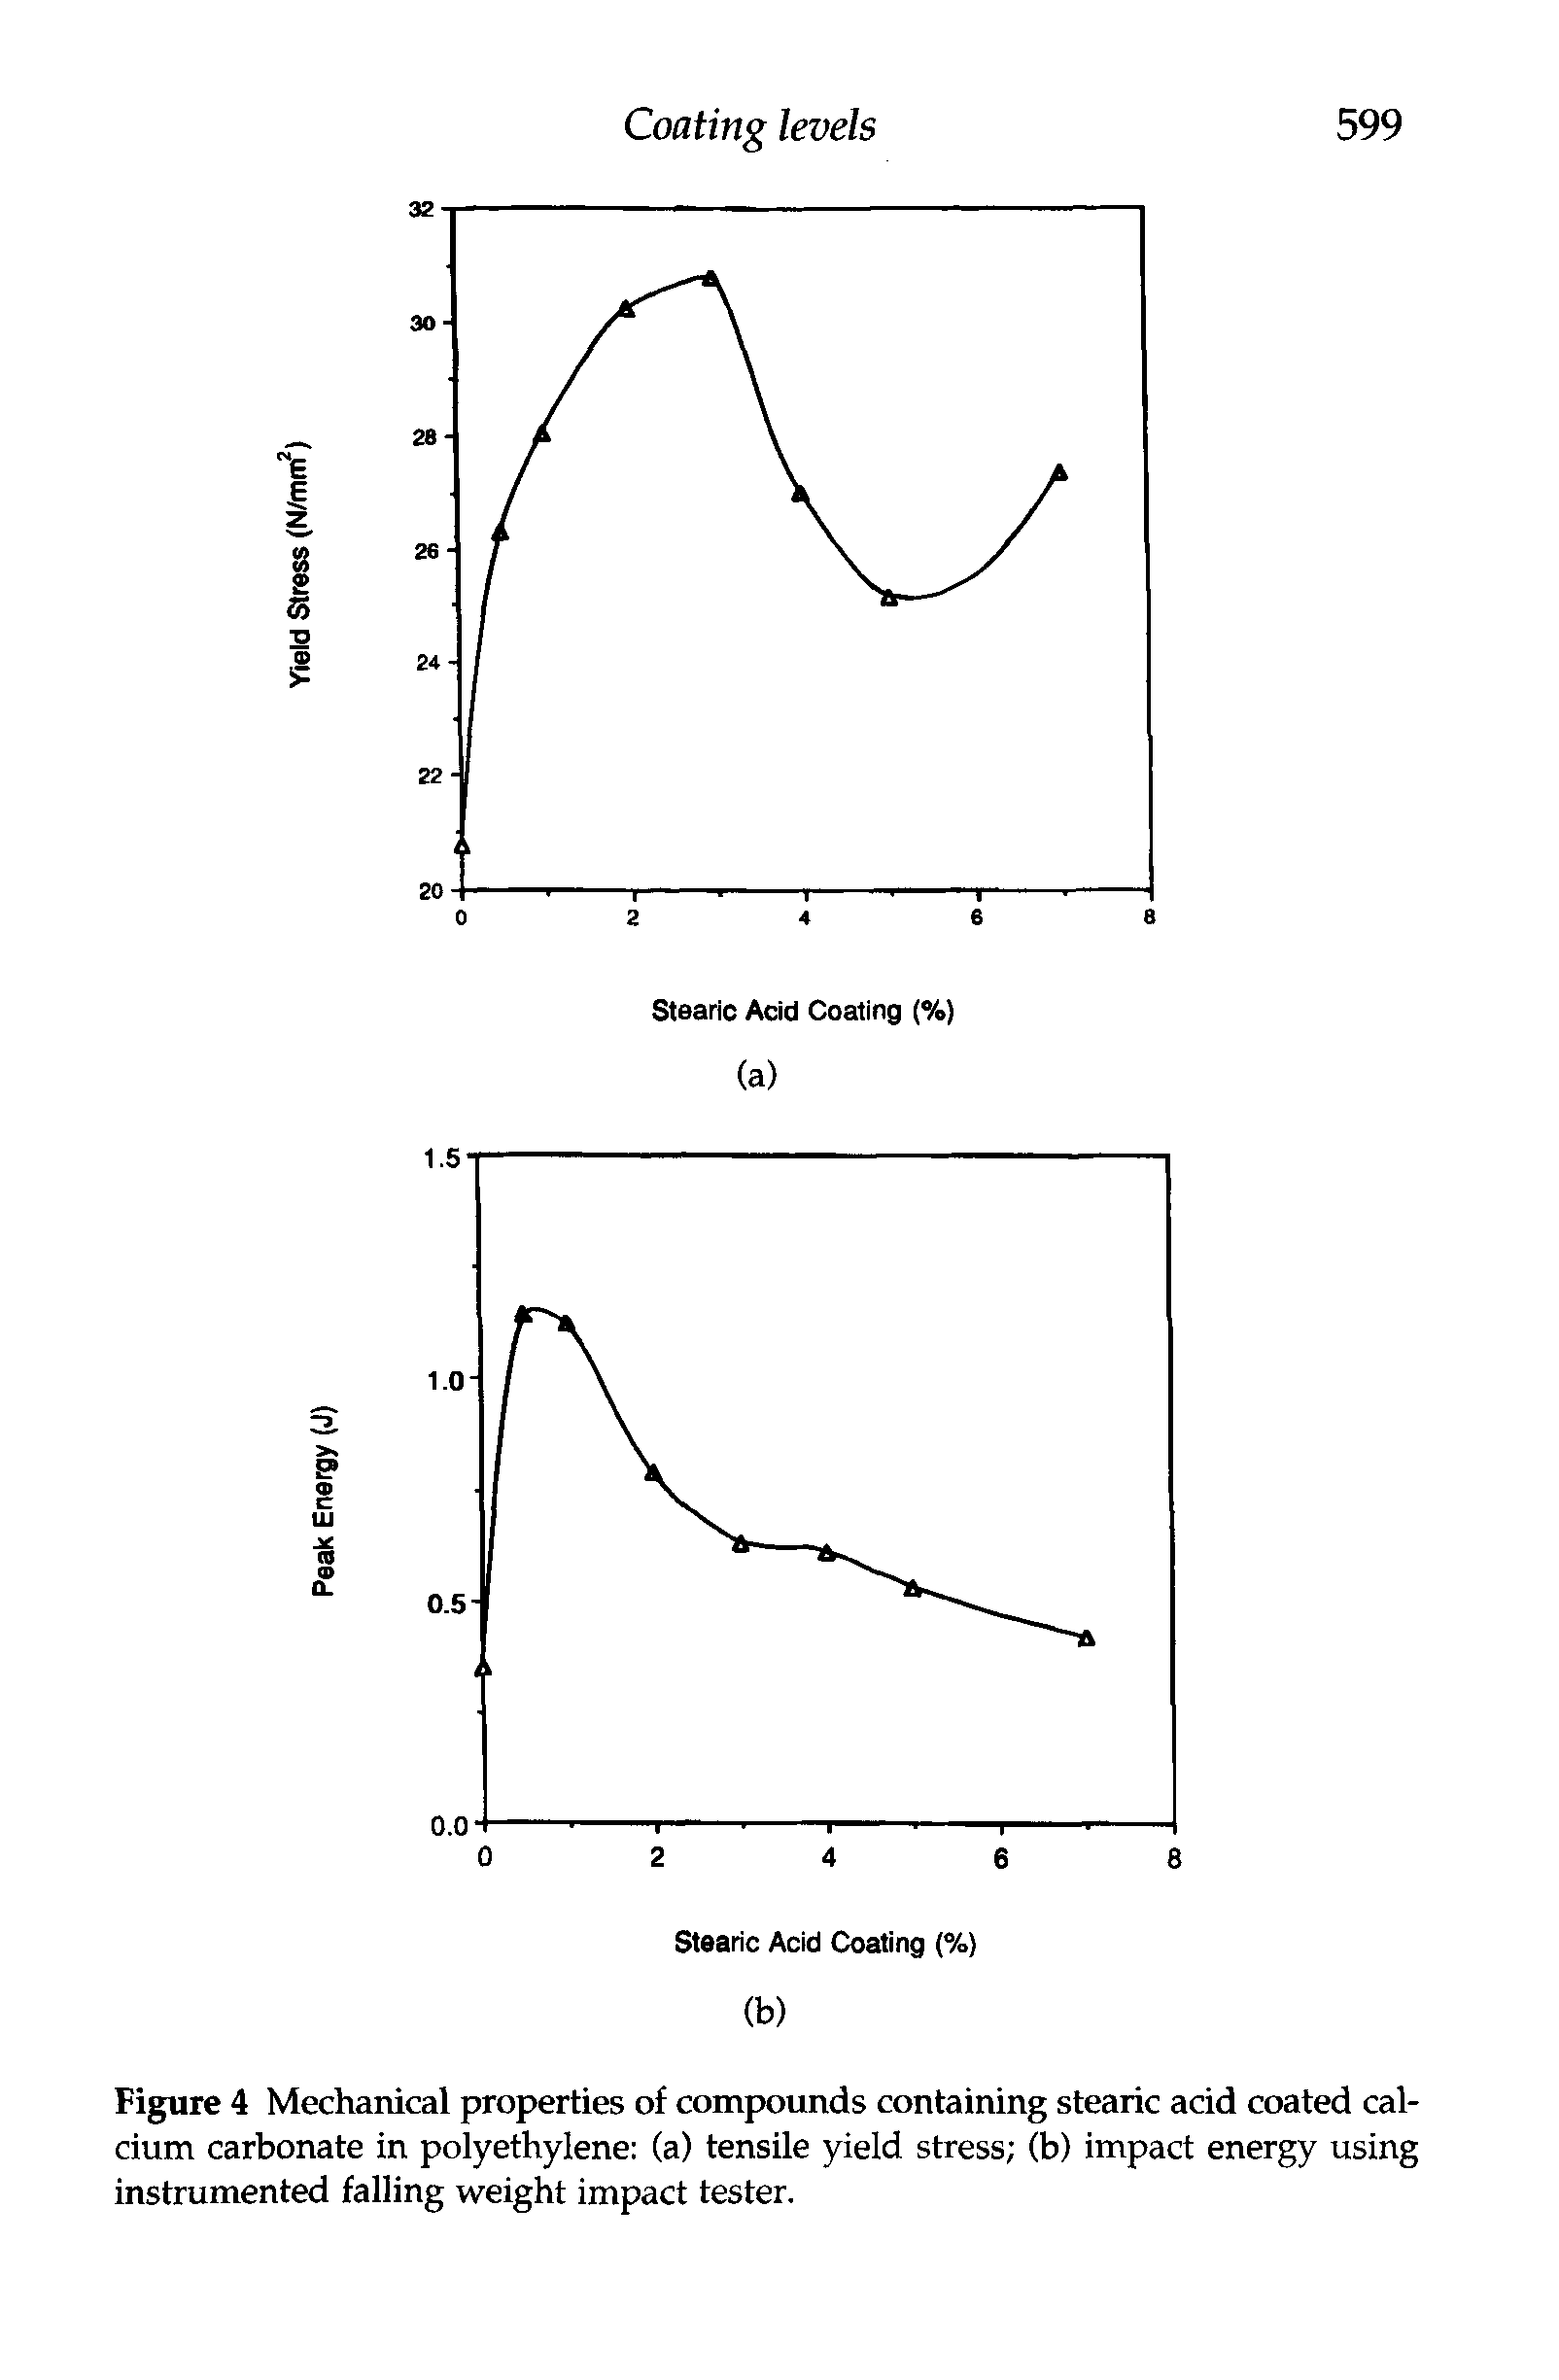 Figure 4 Mechanical properties of compounds containing stearic acid coated calcium carbonate in polyethylene (a) tensile yield stress (b) impact energy using instrumented falling weight impact tester.